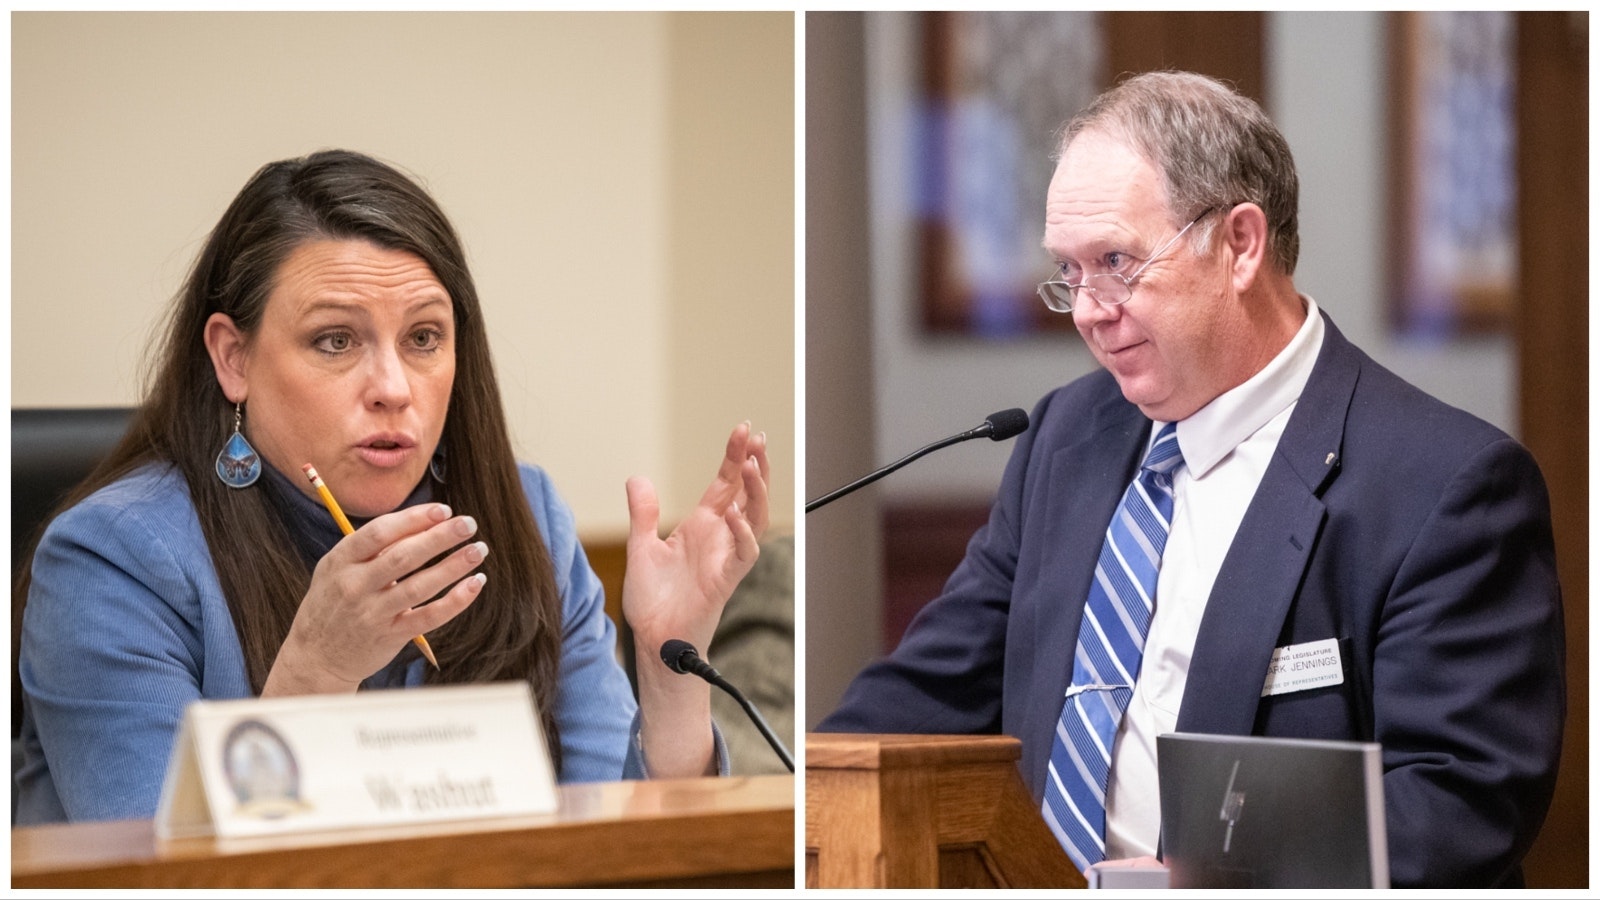 State Reps. Ember Oakley and Mark Jennings are both members of the Legislature's Joint Judiciary Committee, which discussed cybercrimes against children in Wyoming on Monday.